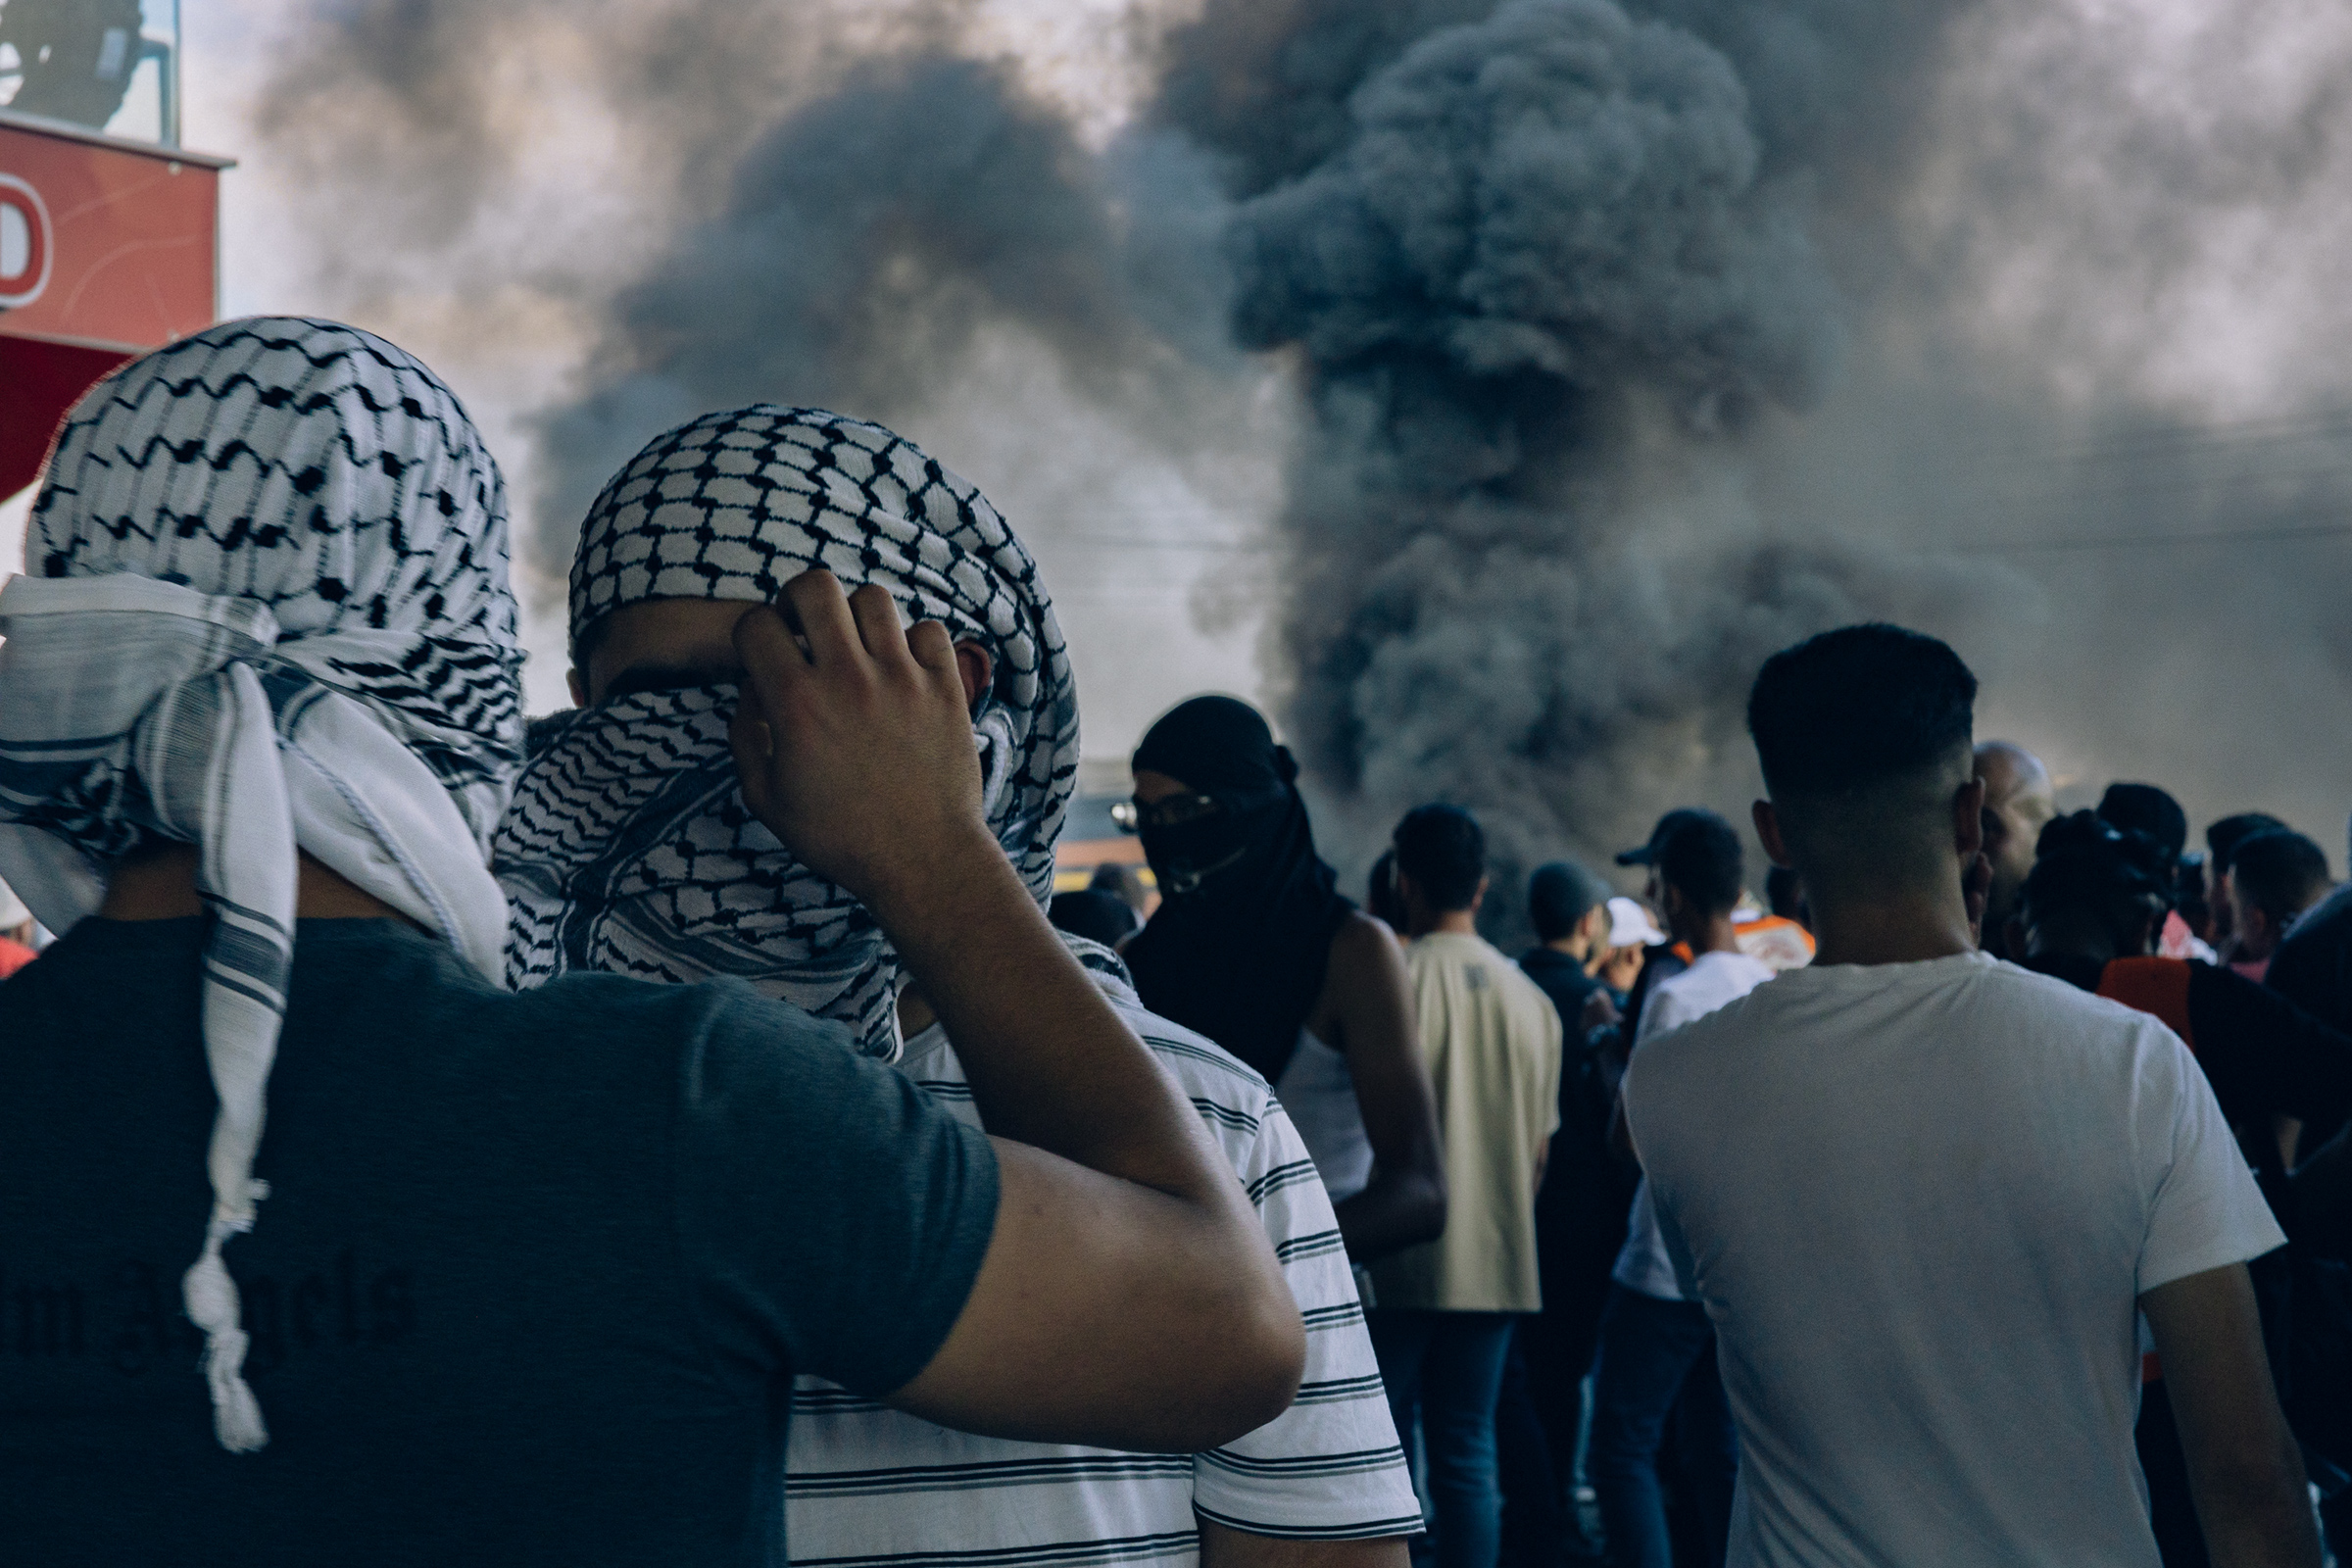 A young Palestinian man has his face shielded with a kuffiyeh during a confrontation with the Israeli occupation near the illegal Beit El settlement in the West Bank city of al-Bireh, on Oct. 13. The kuffiyeh, a traditional headdress, serves as a symbol of Palestinian identity.